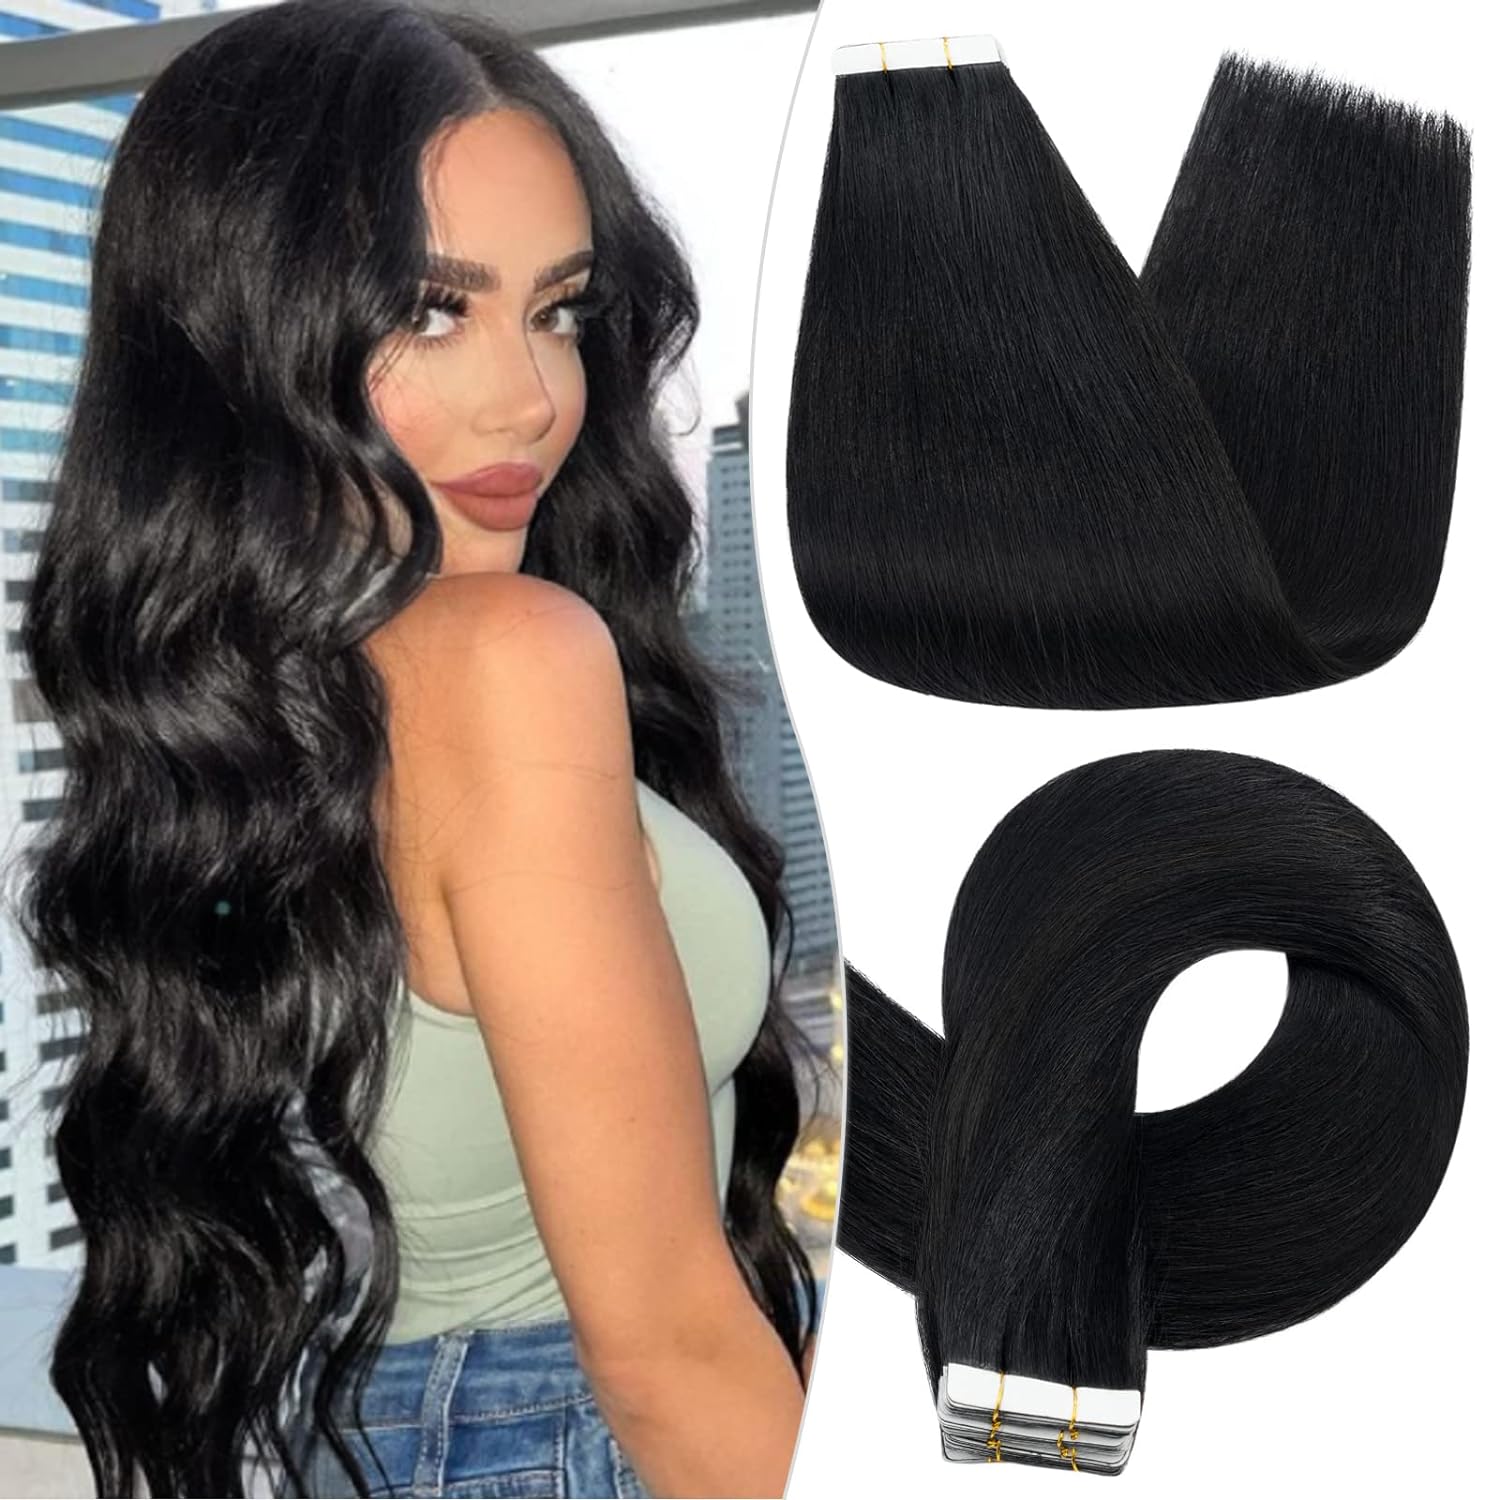 Tape in Hair Extensions Human Hair Jet Black Hair Extensions Tape in Invisible Tape in Extensions Real Human Hair Tape in Seamless Human Hair Extensions 18 Inch #1 40pcs 100g